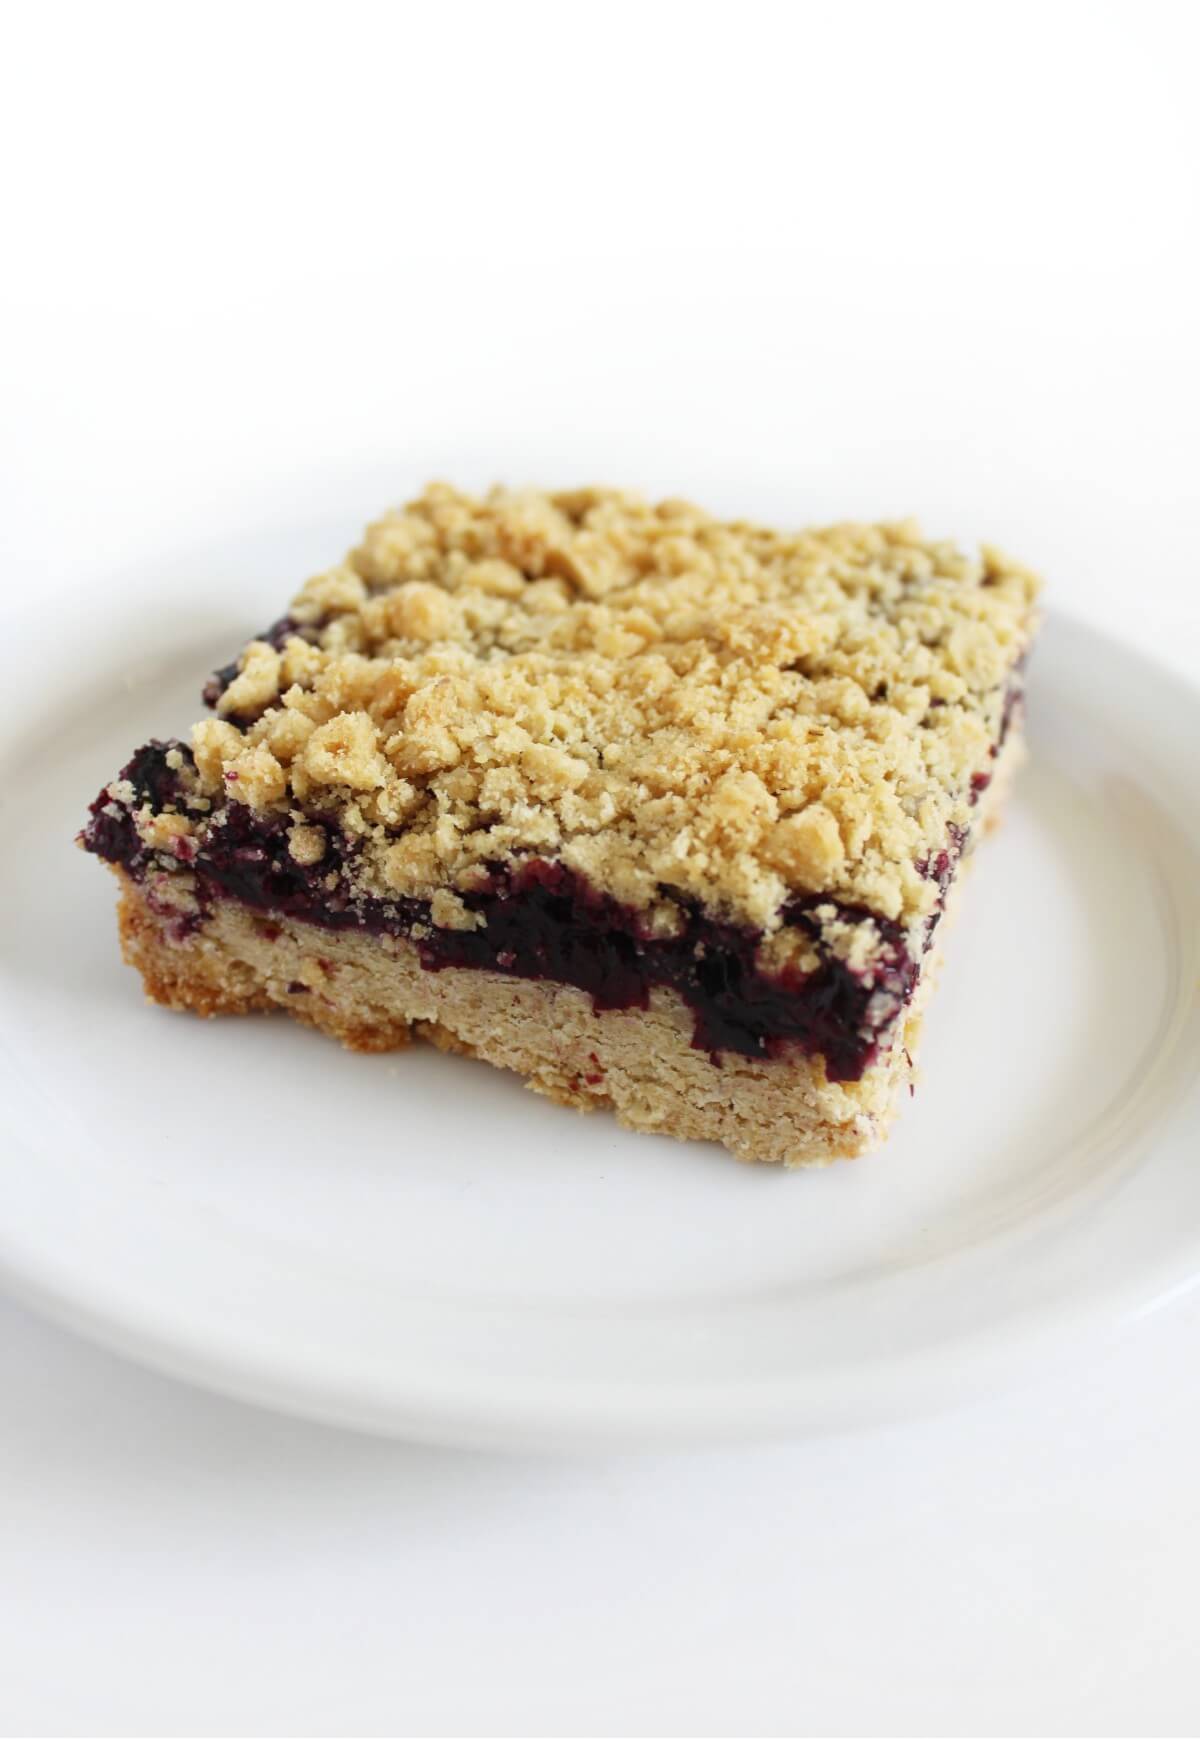 single gluten-free blueberry crumble bar on white plate